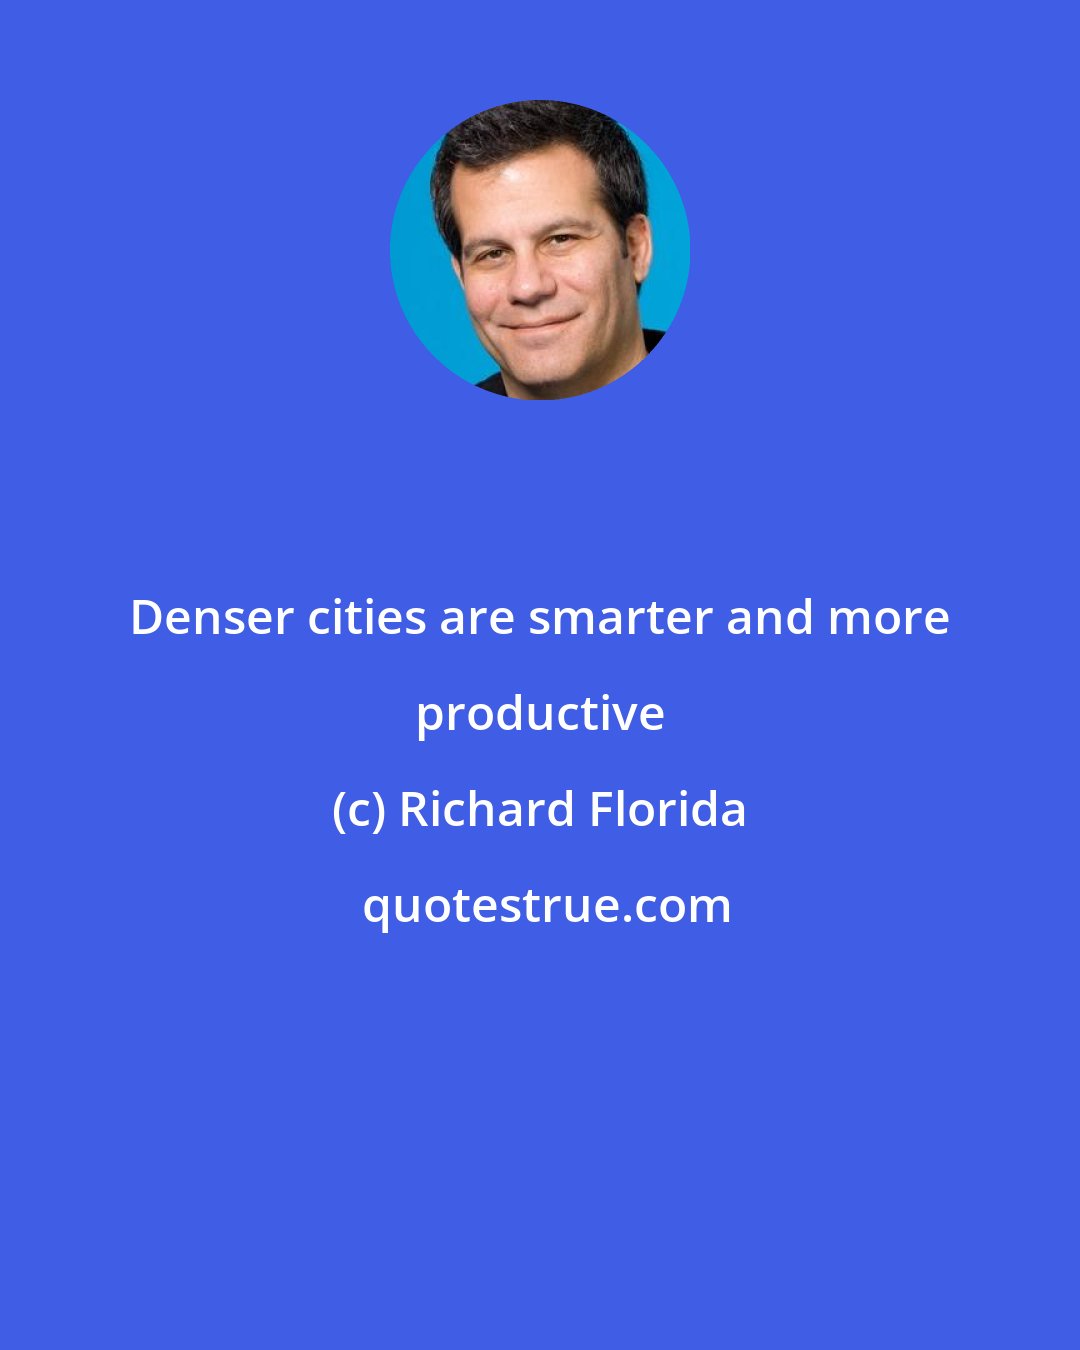 Richard Florida: Denser cities are smarter and more productive